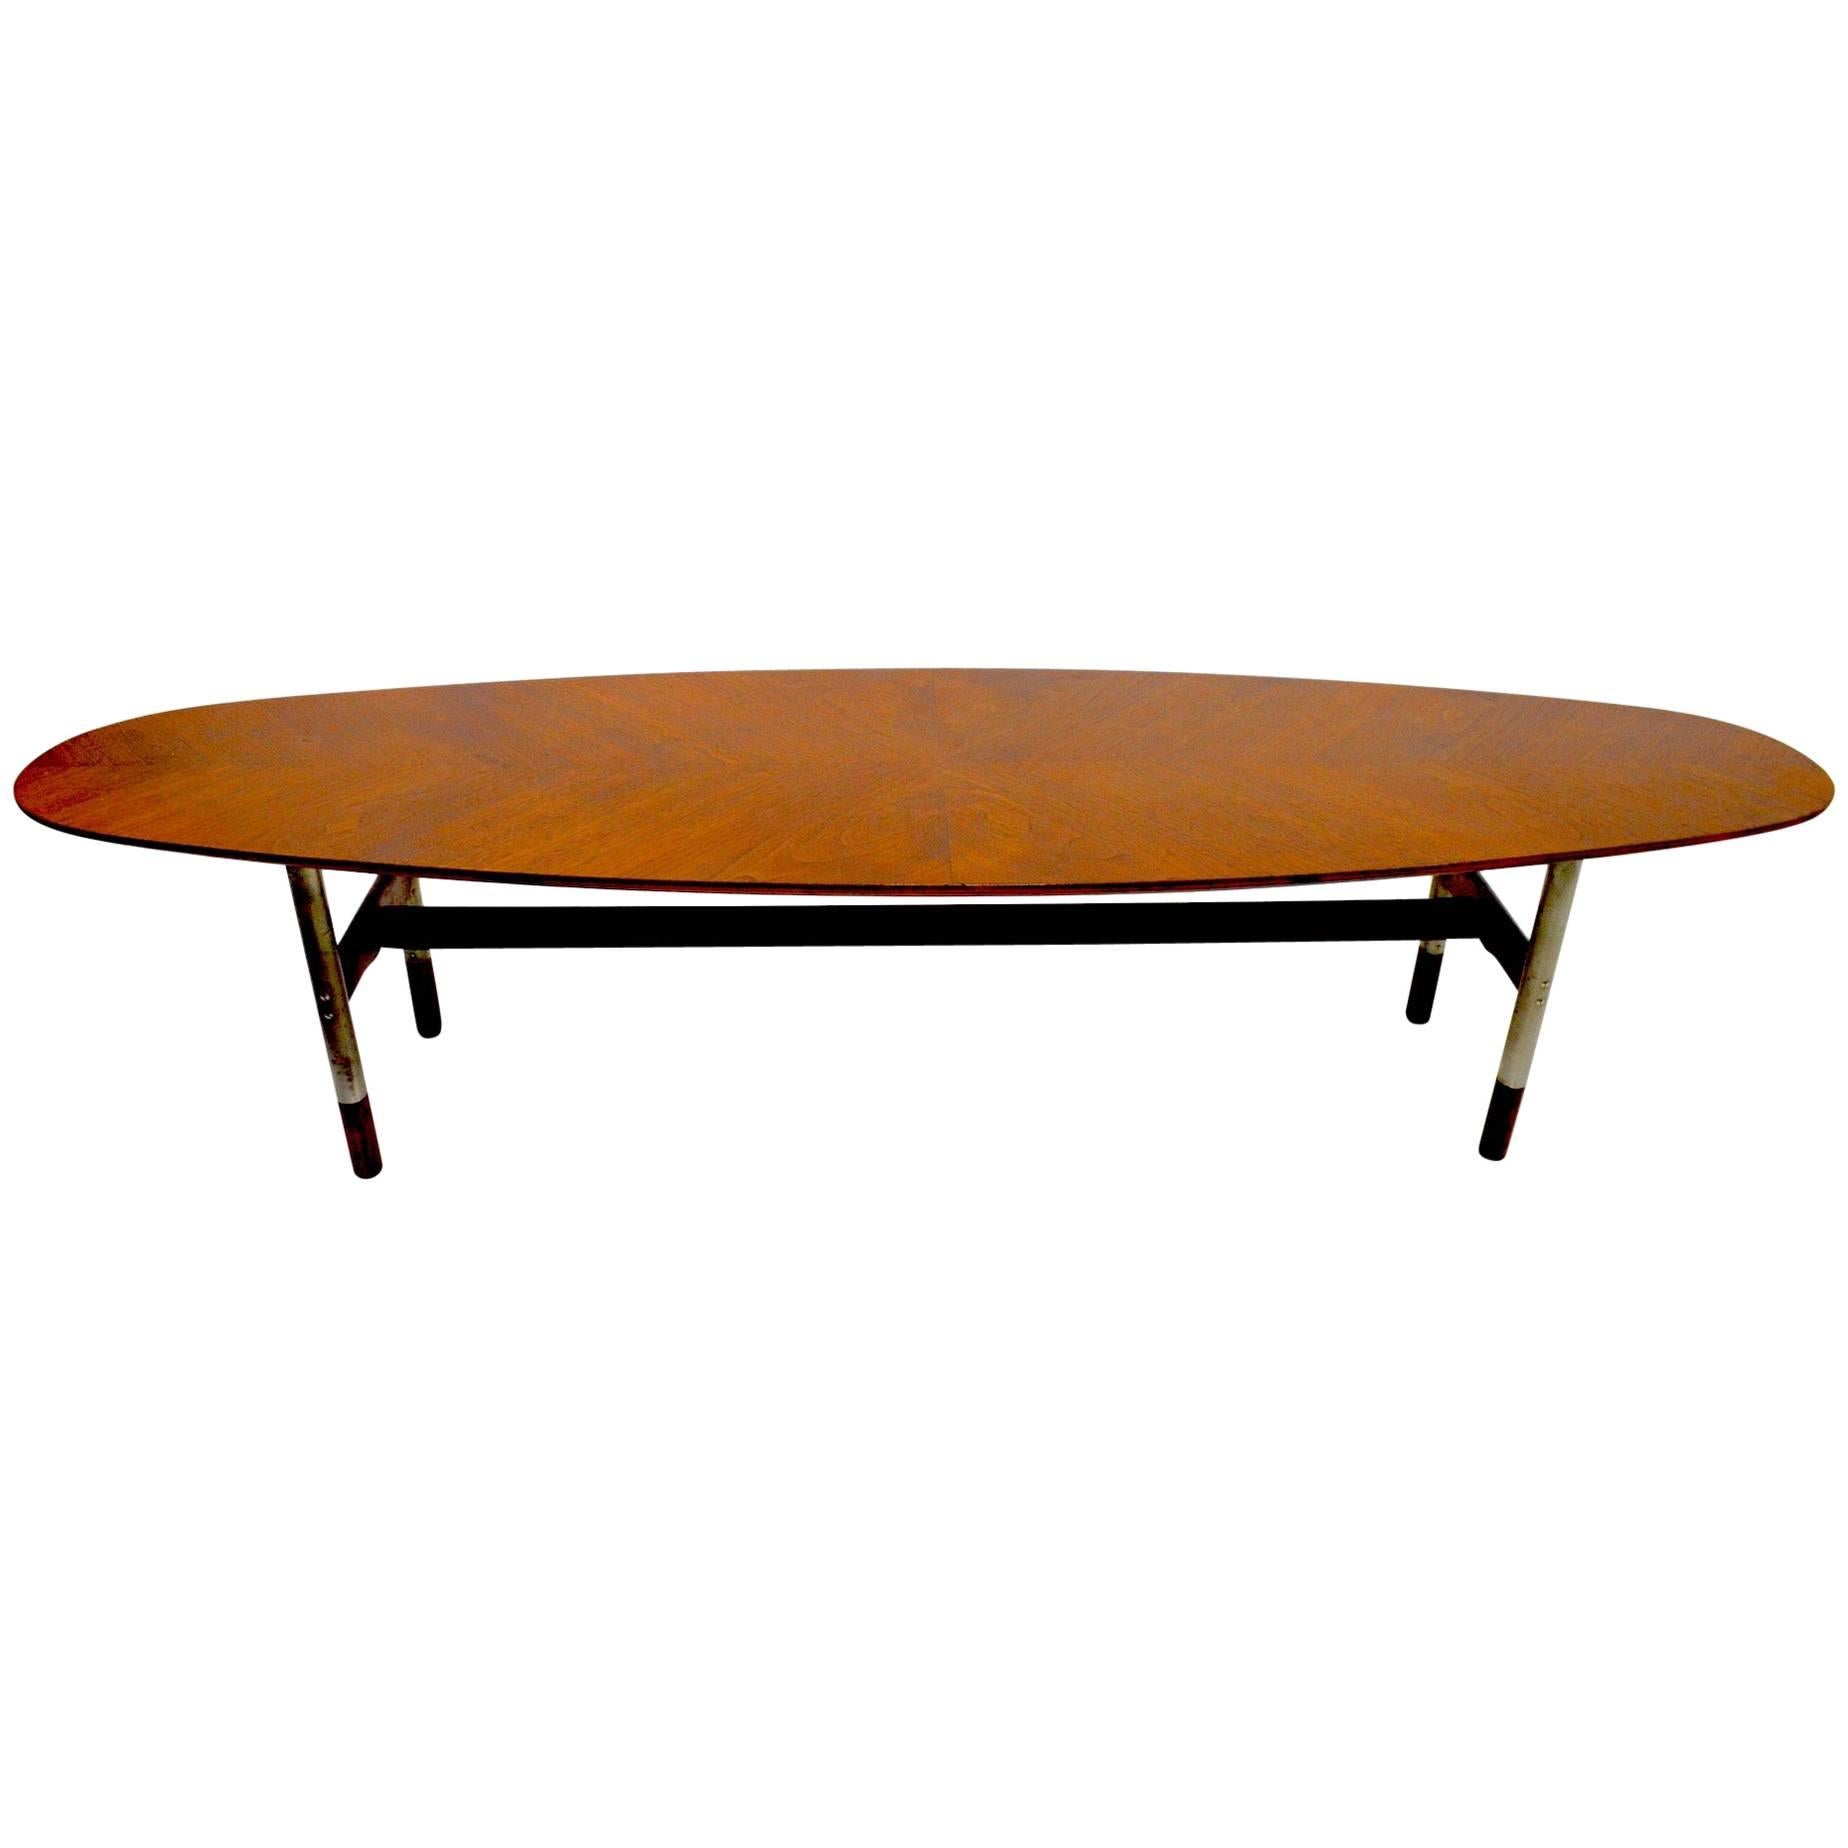 Surfboard Table Attributed to Arne Vodder